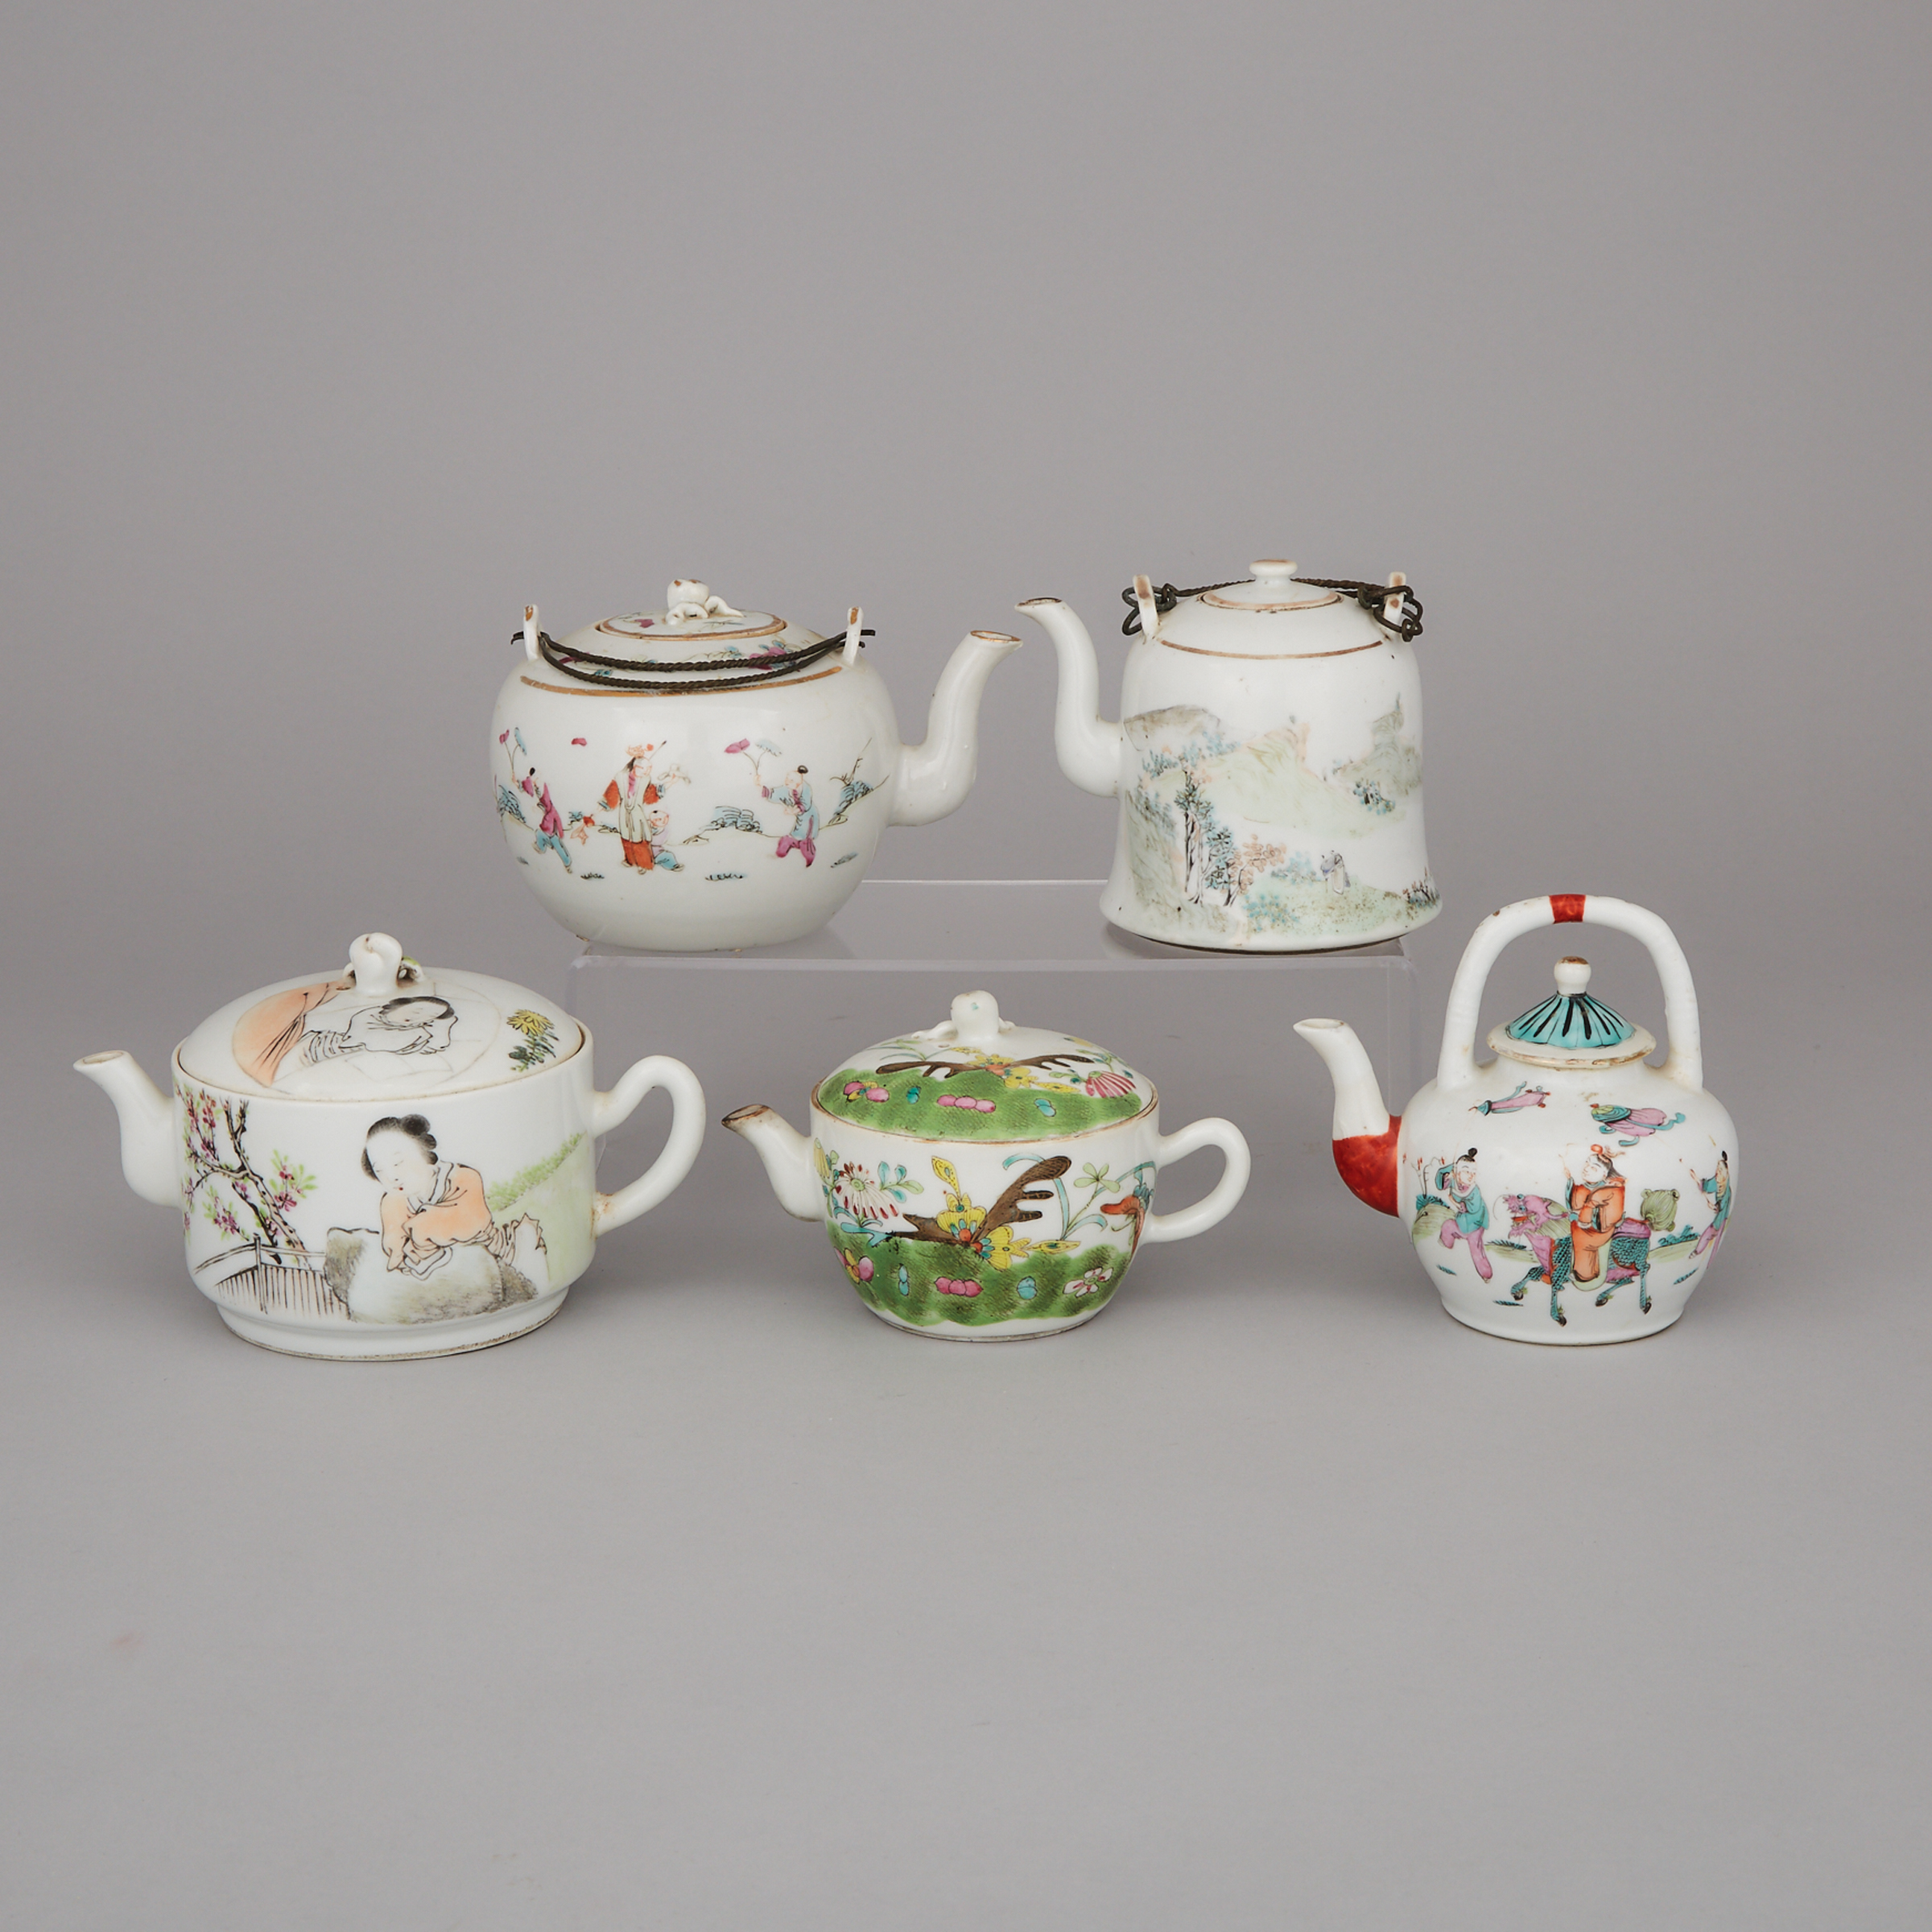 A Group of Five Famille Rose Teapots, Republican Period